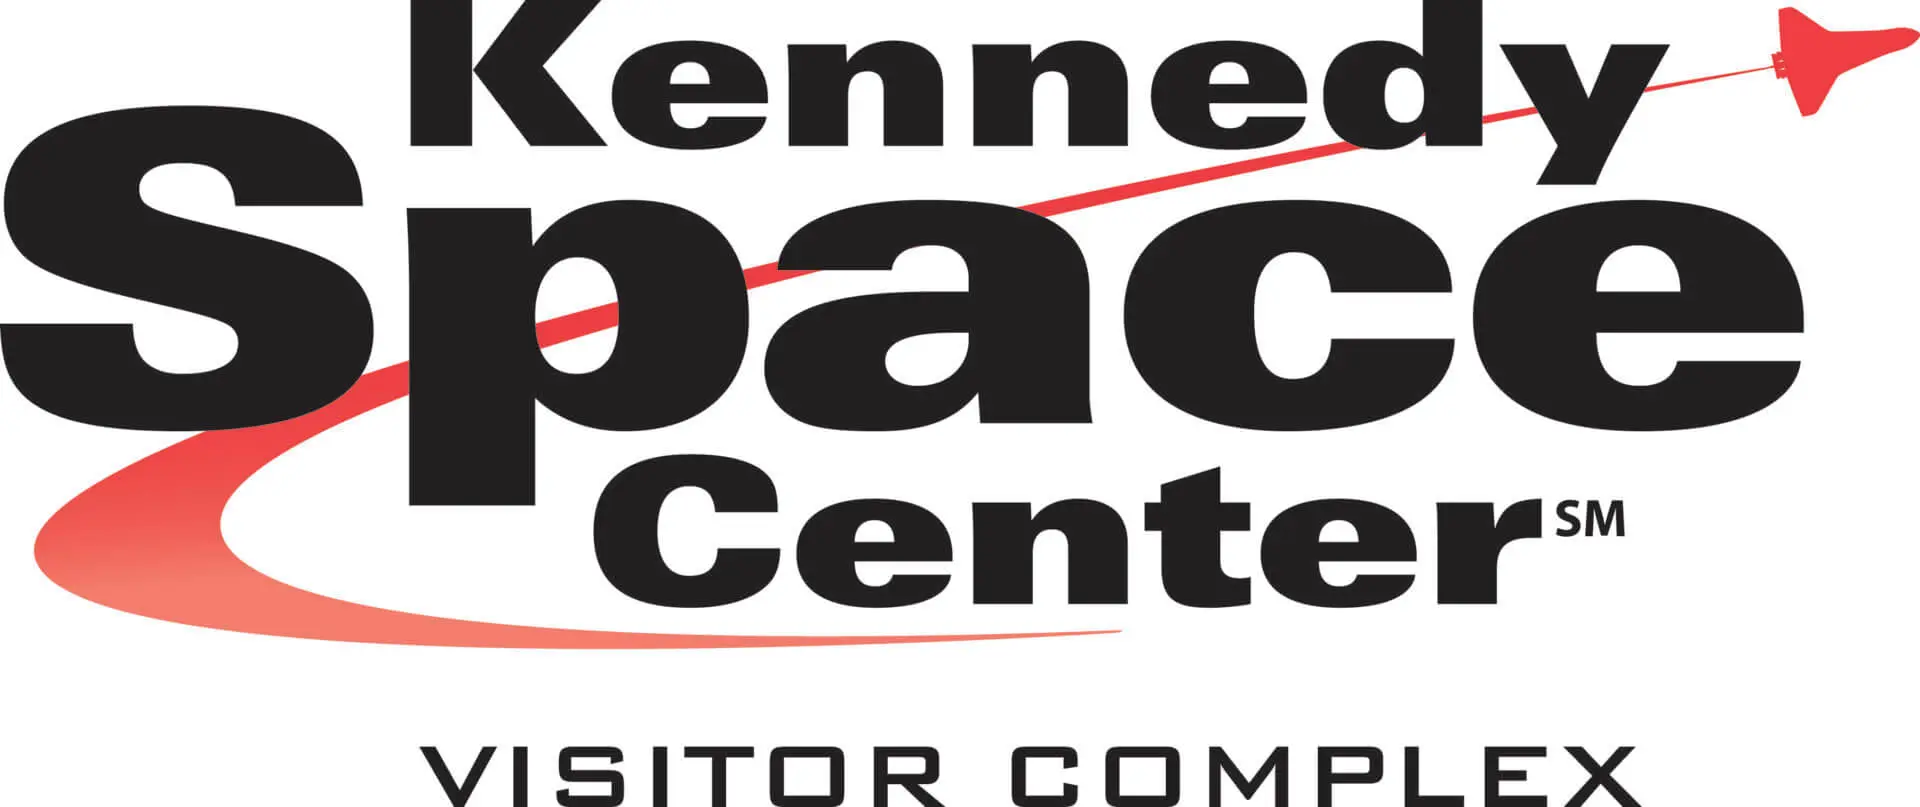 Logo of kennedy space center visitor complex featuring bold black and red text with a stylized red rocket trail.